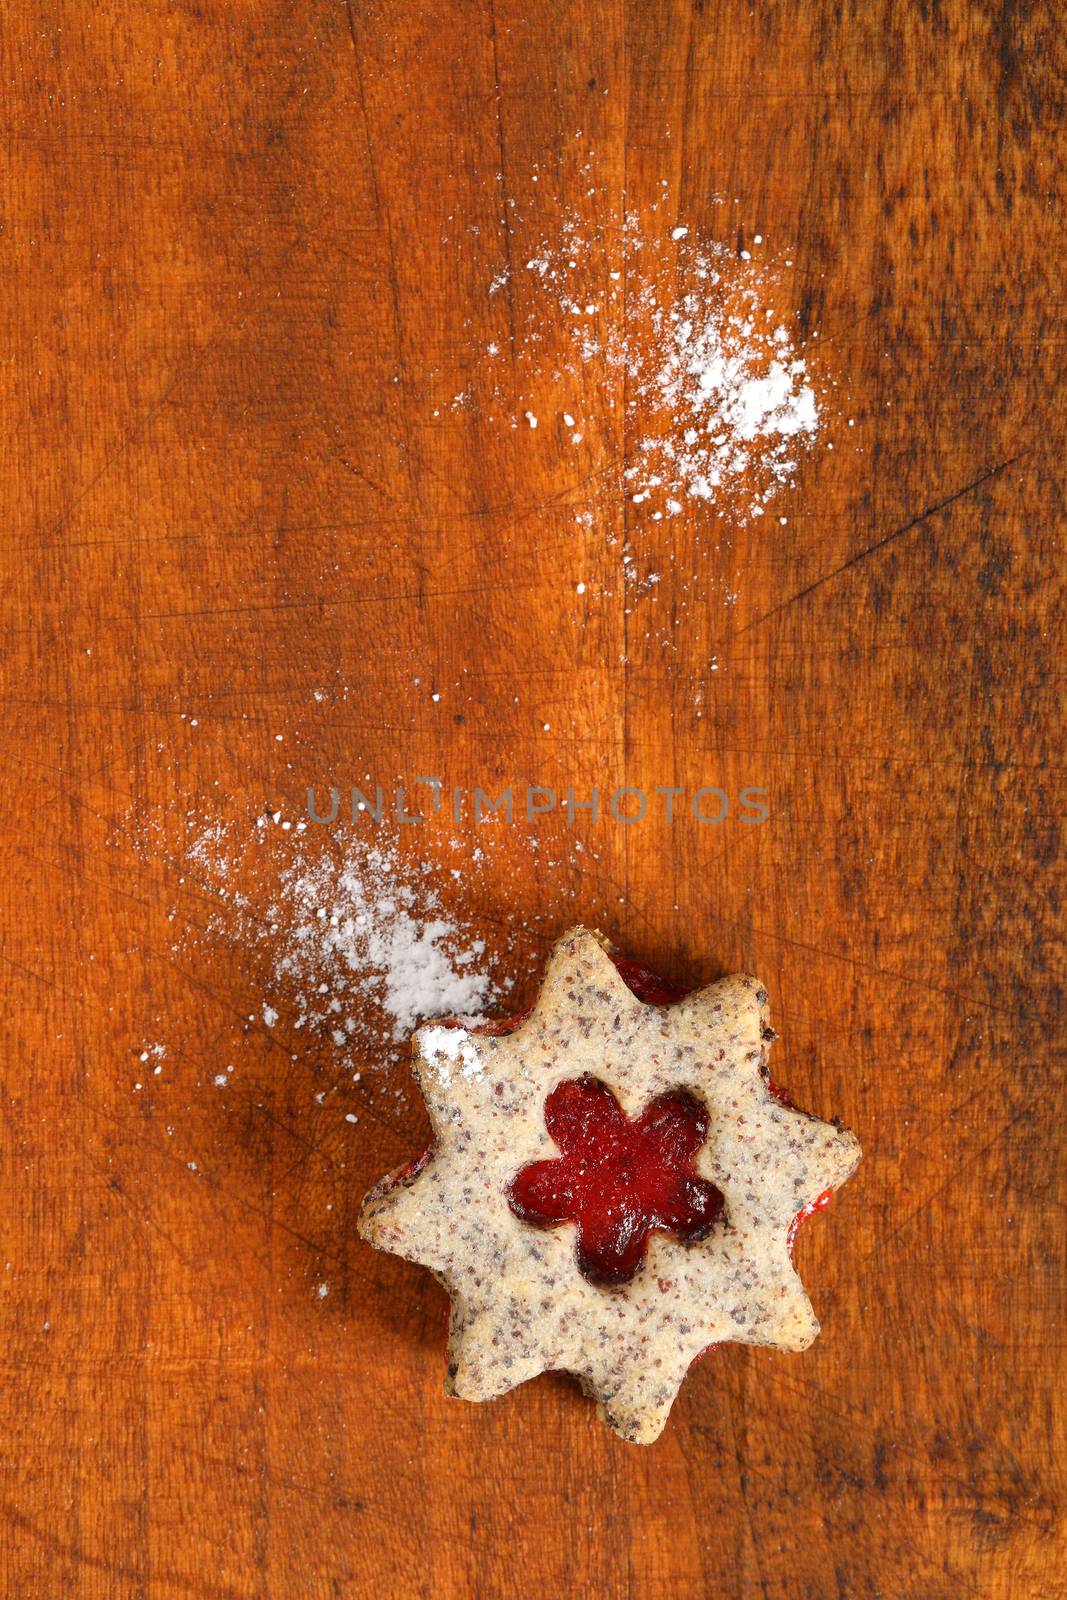 shortbread cookie with jam filling on wooden background